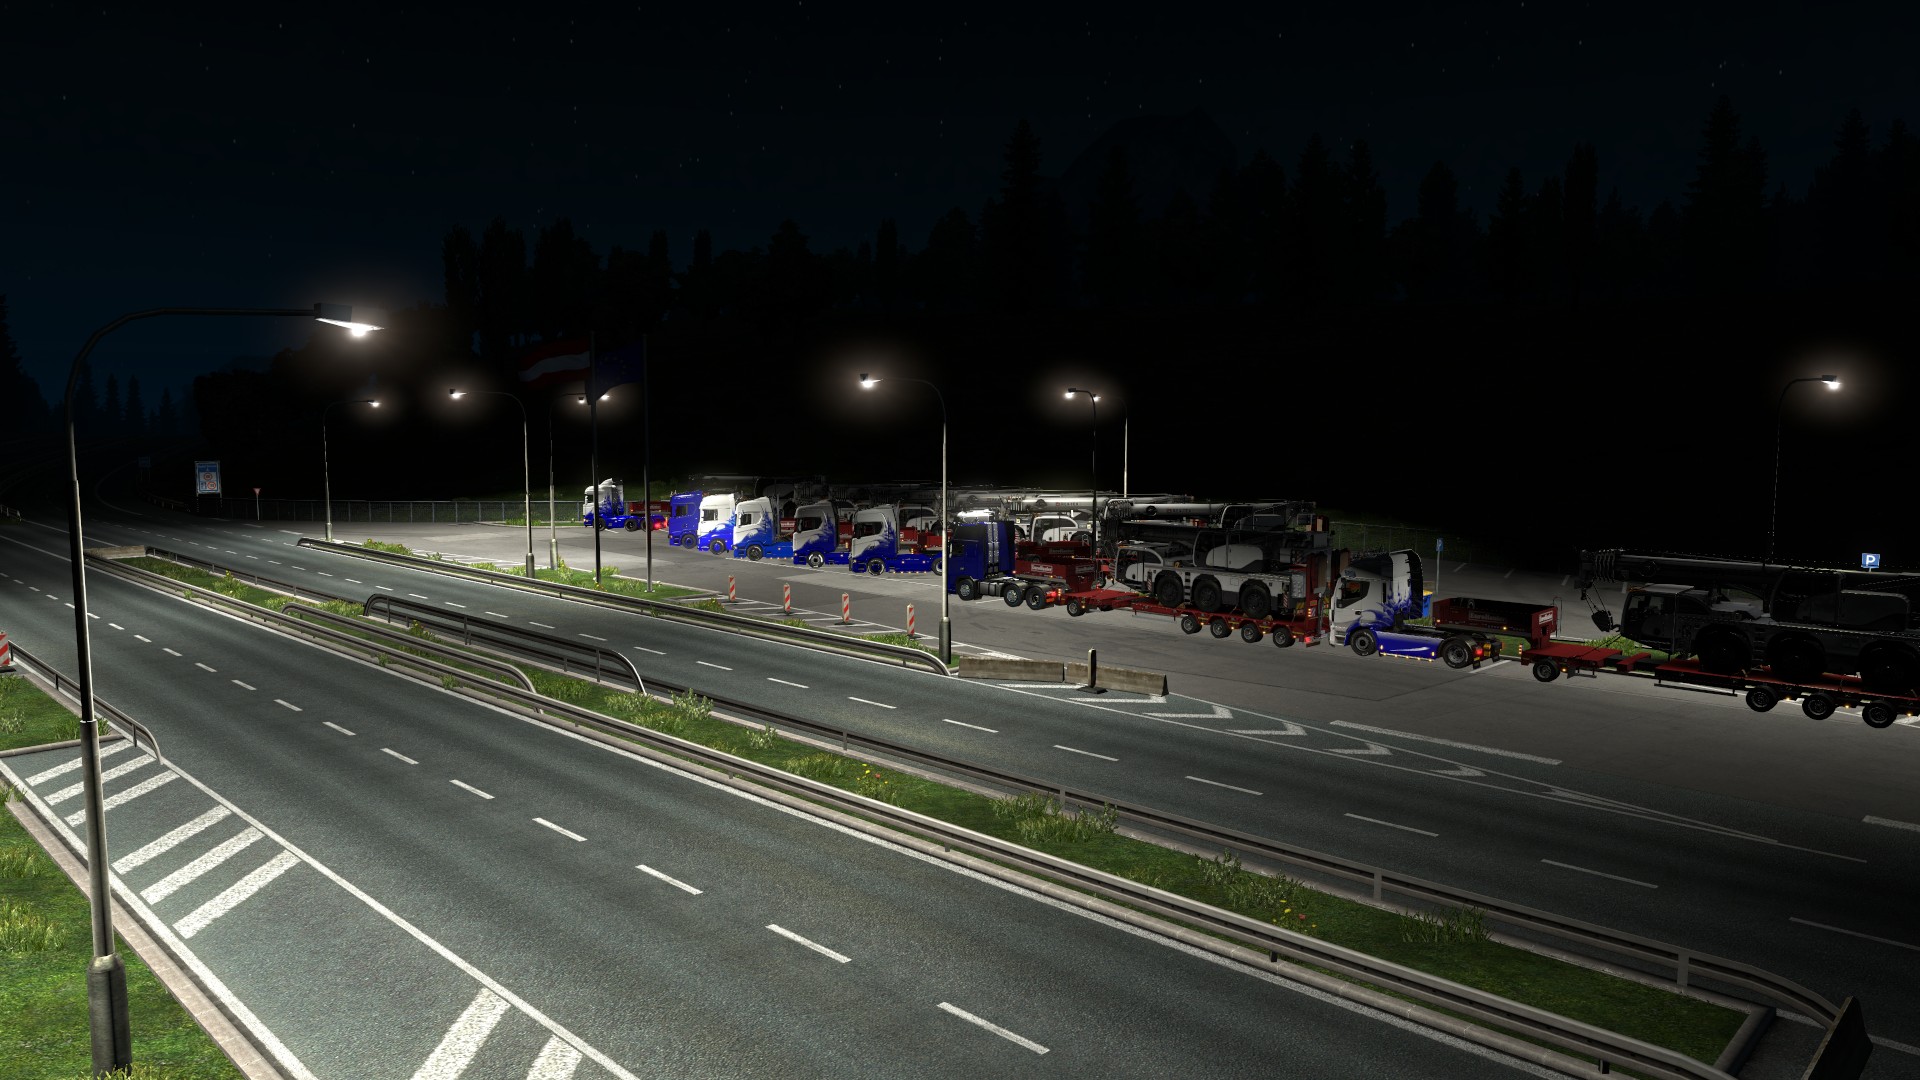 ets2_20200117_230655_00.png